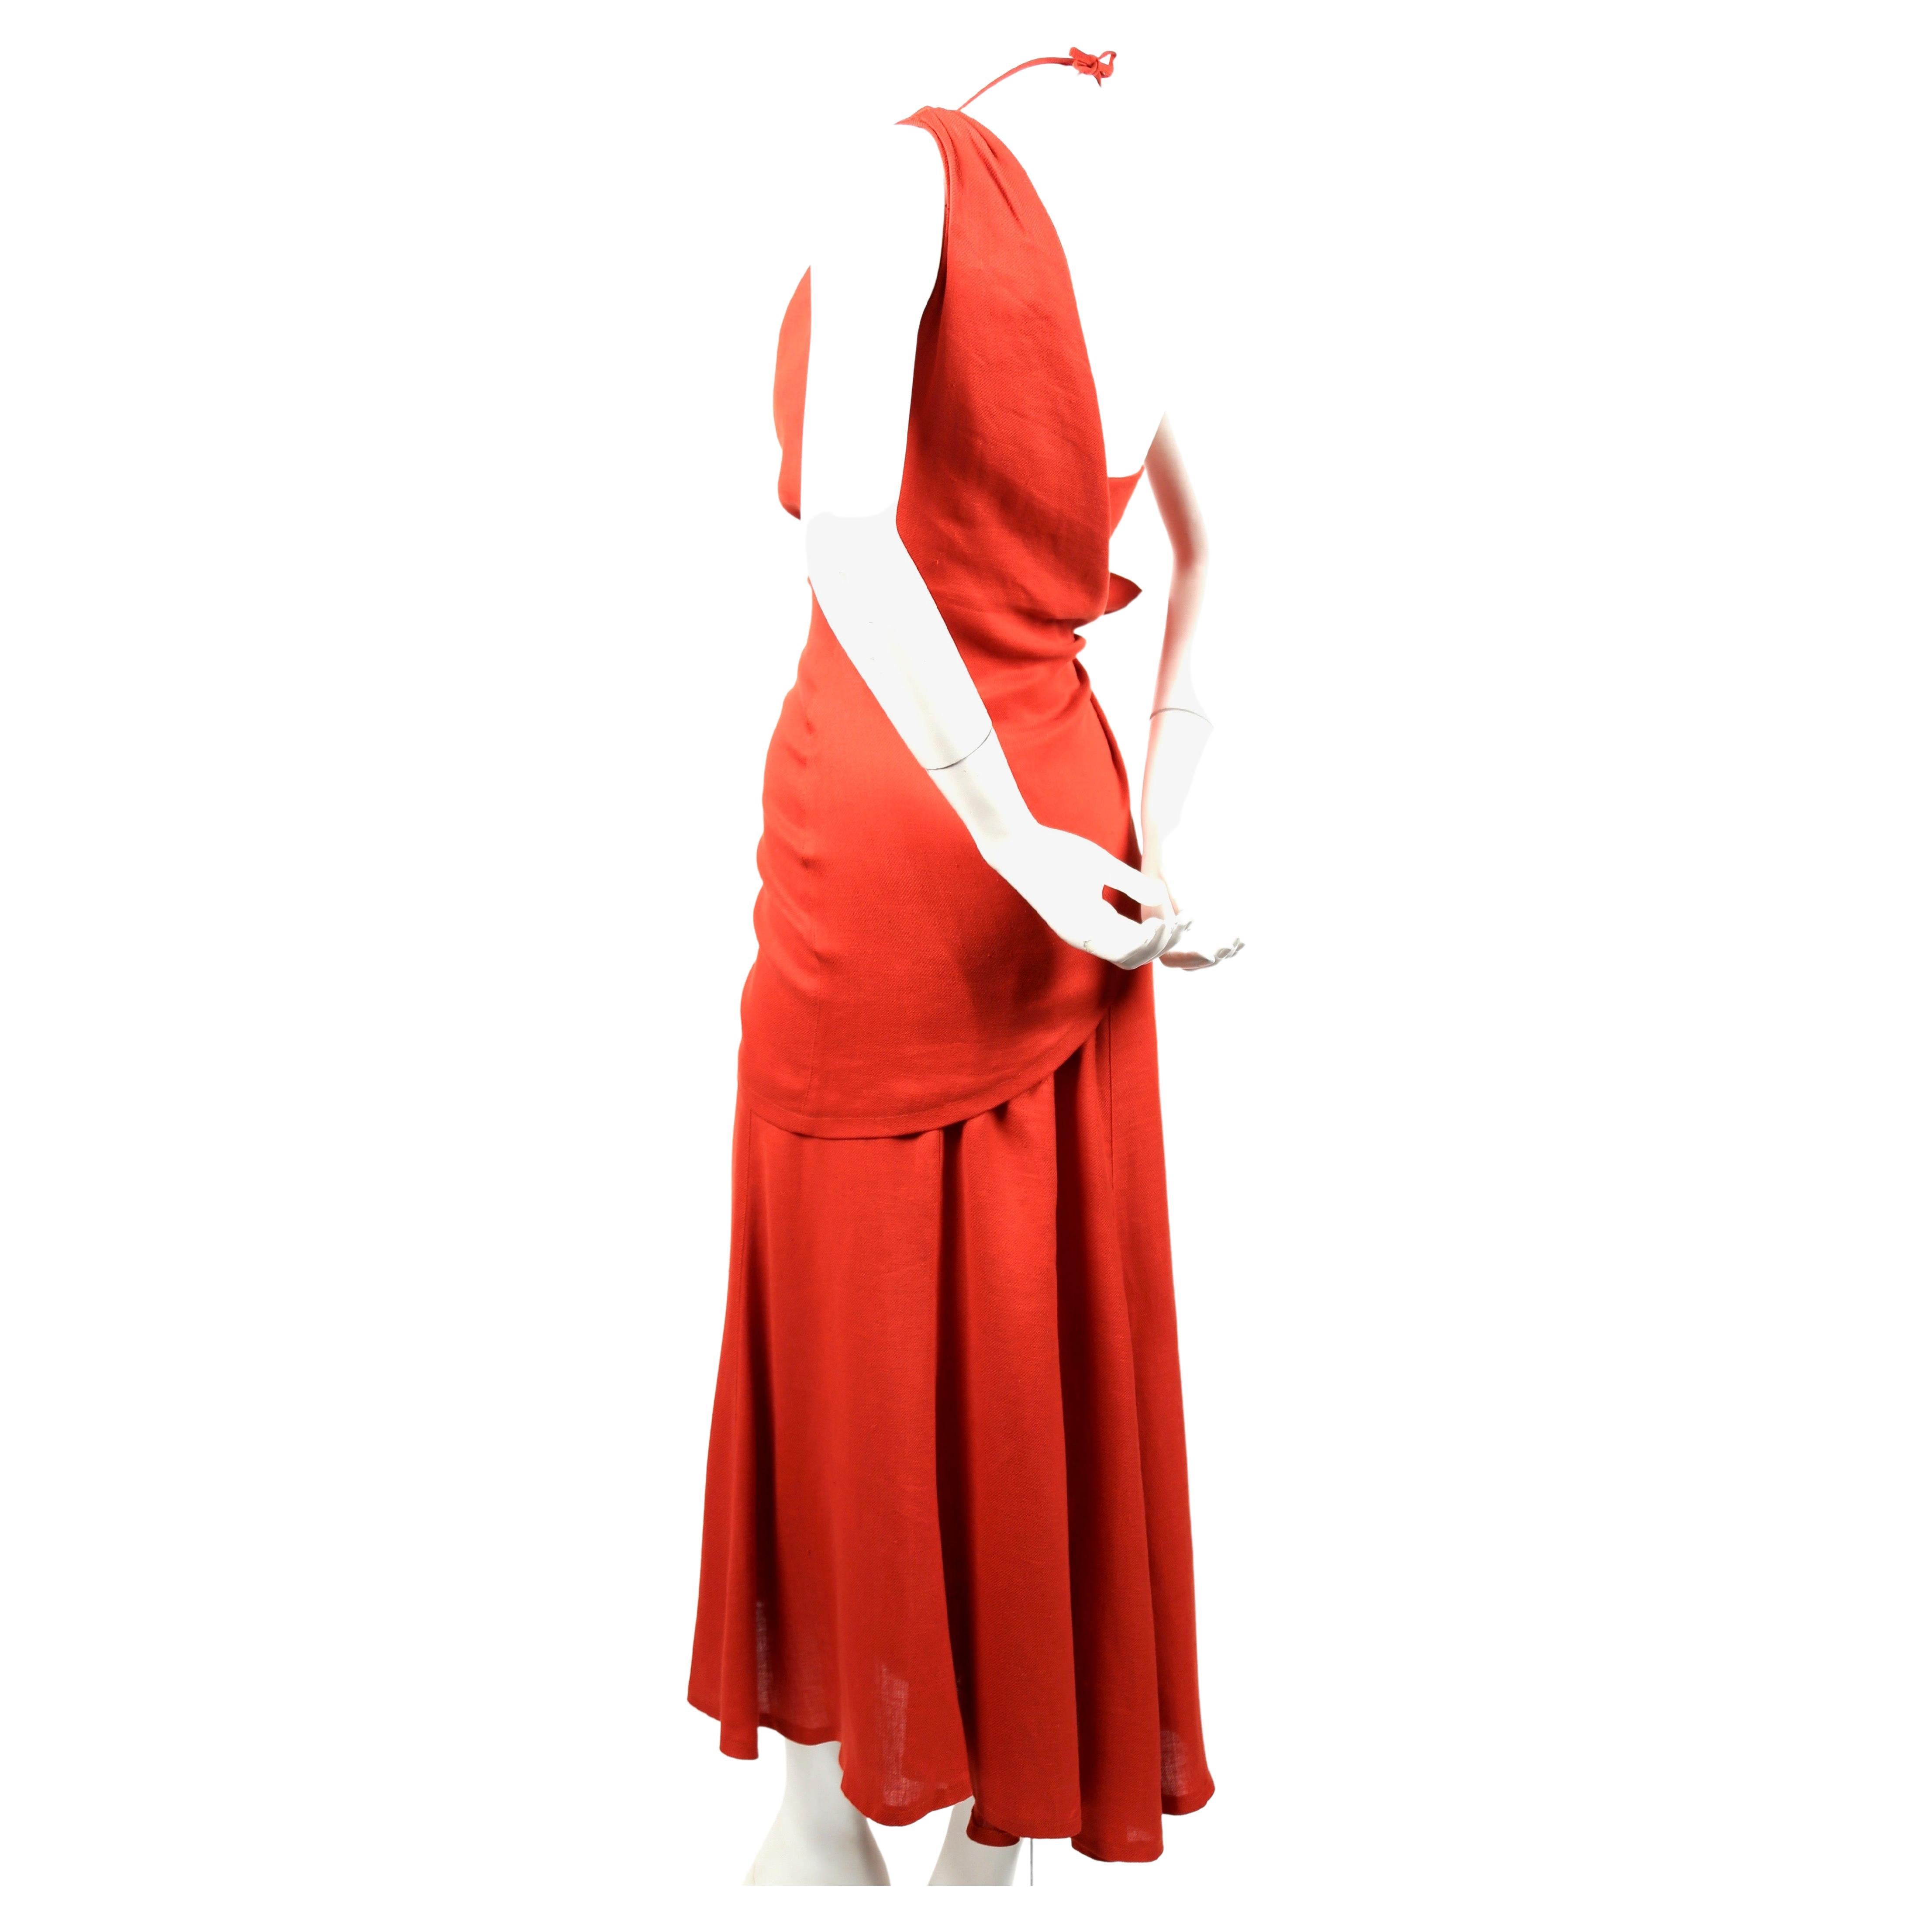 Terracotta linen dress with asymmetrical wrap designed by Thierry Mugler dating to the 1990's. French size 36. Approximate measurements: bust 32-33